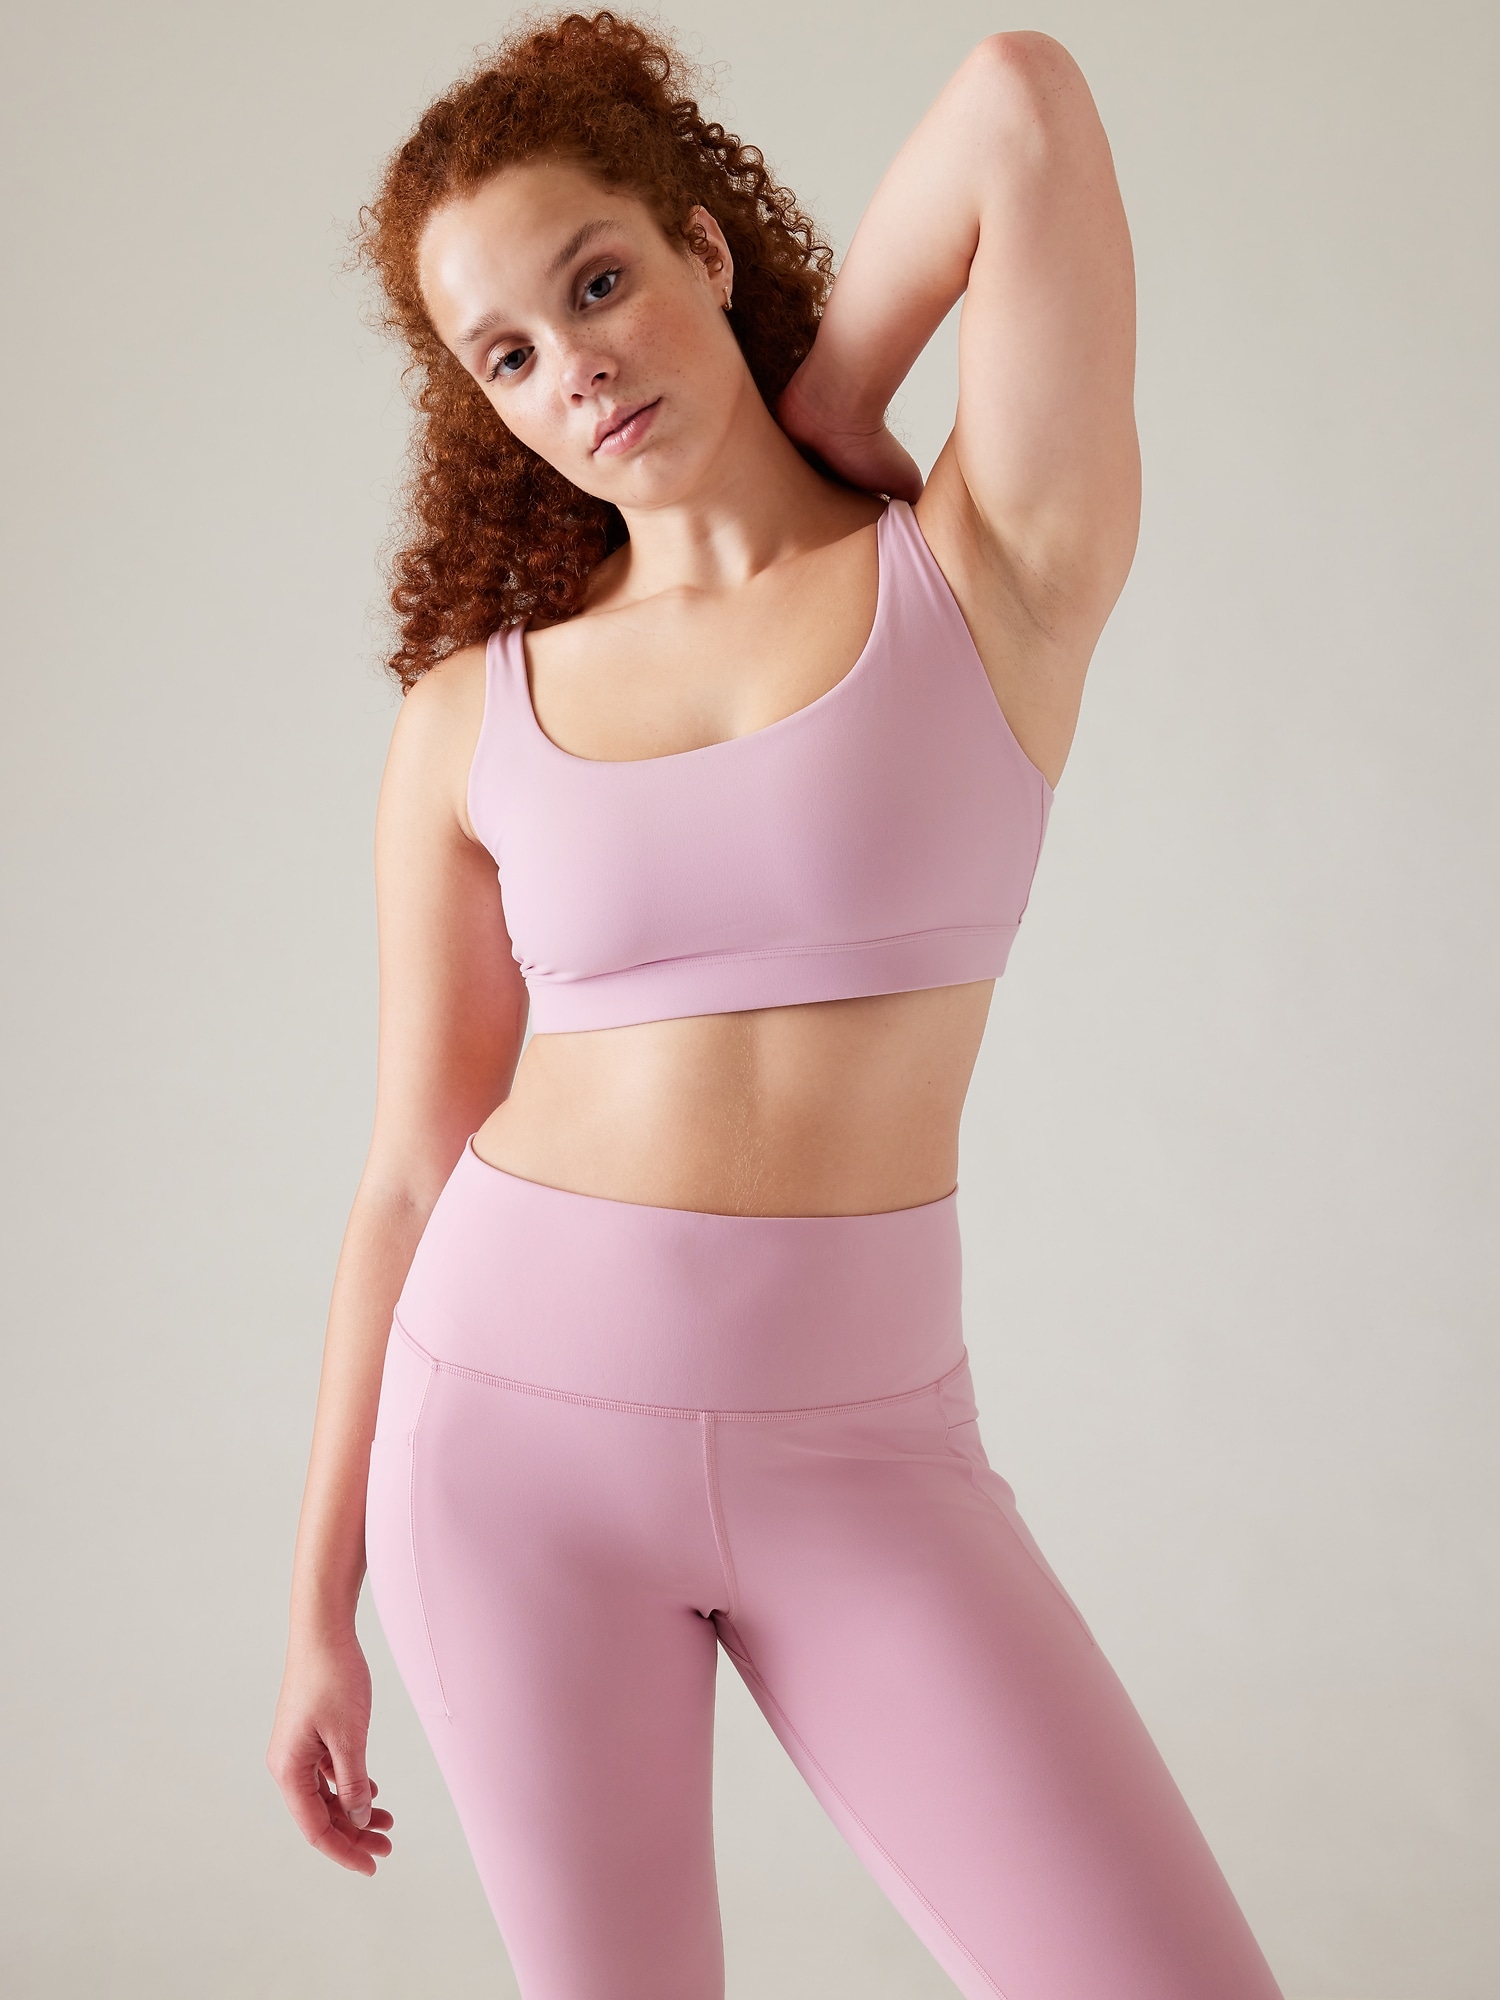 I Am 14 And Still Wear A Training Bra Or Exercise A Cup Bra, 44% OFF